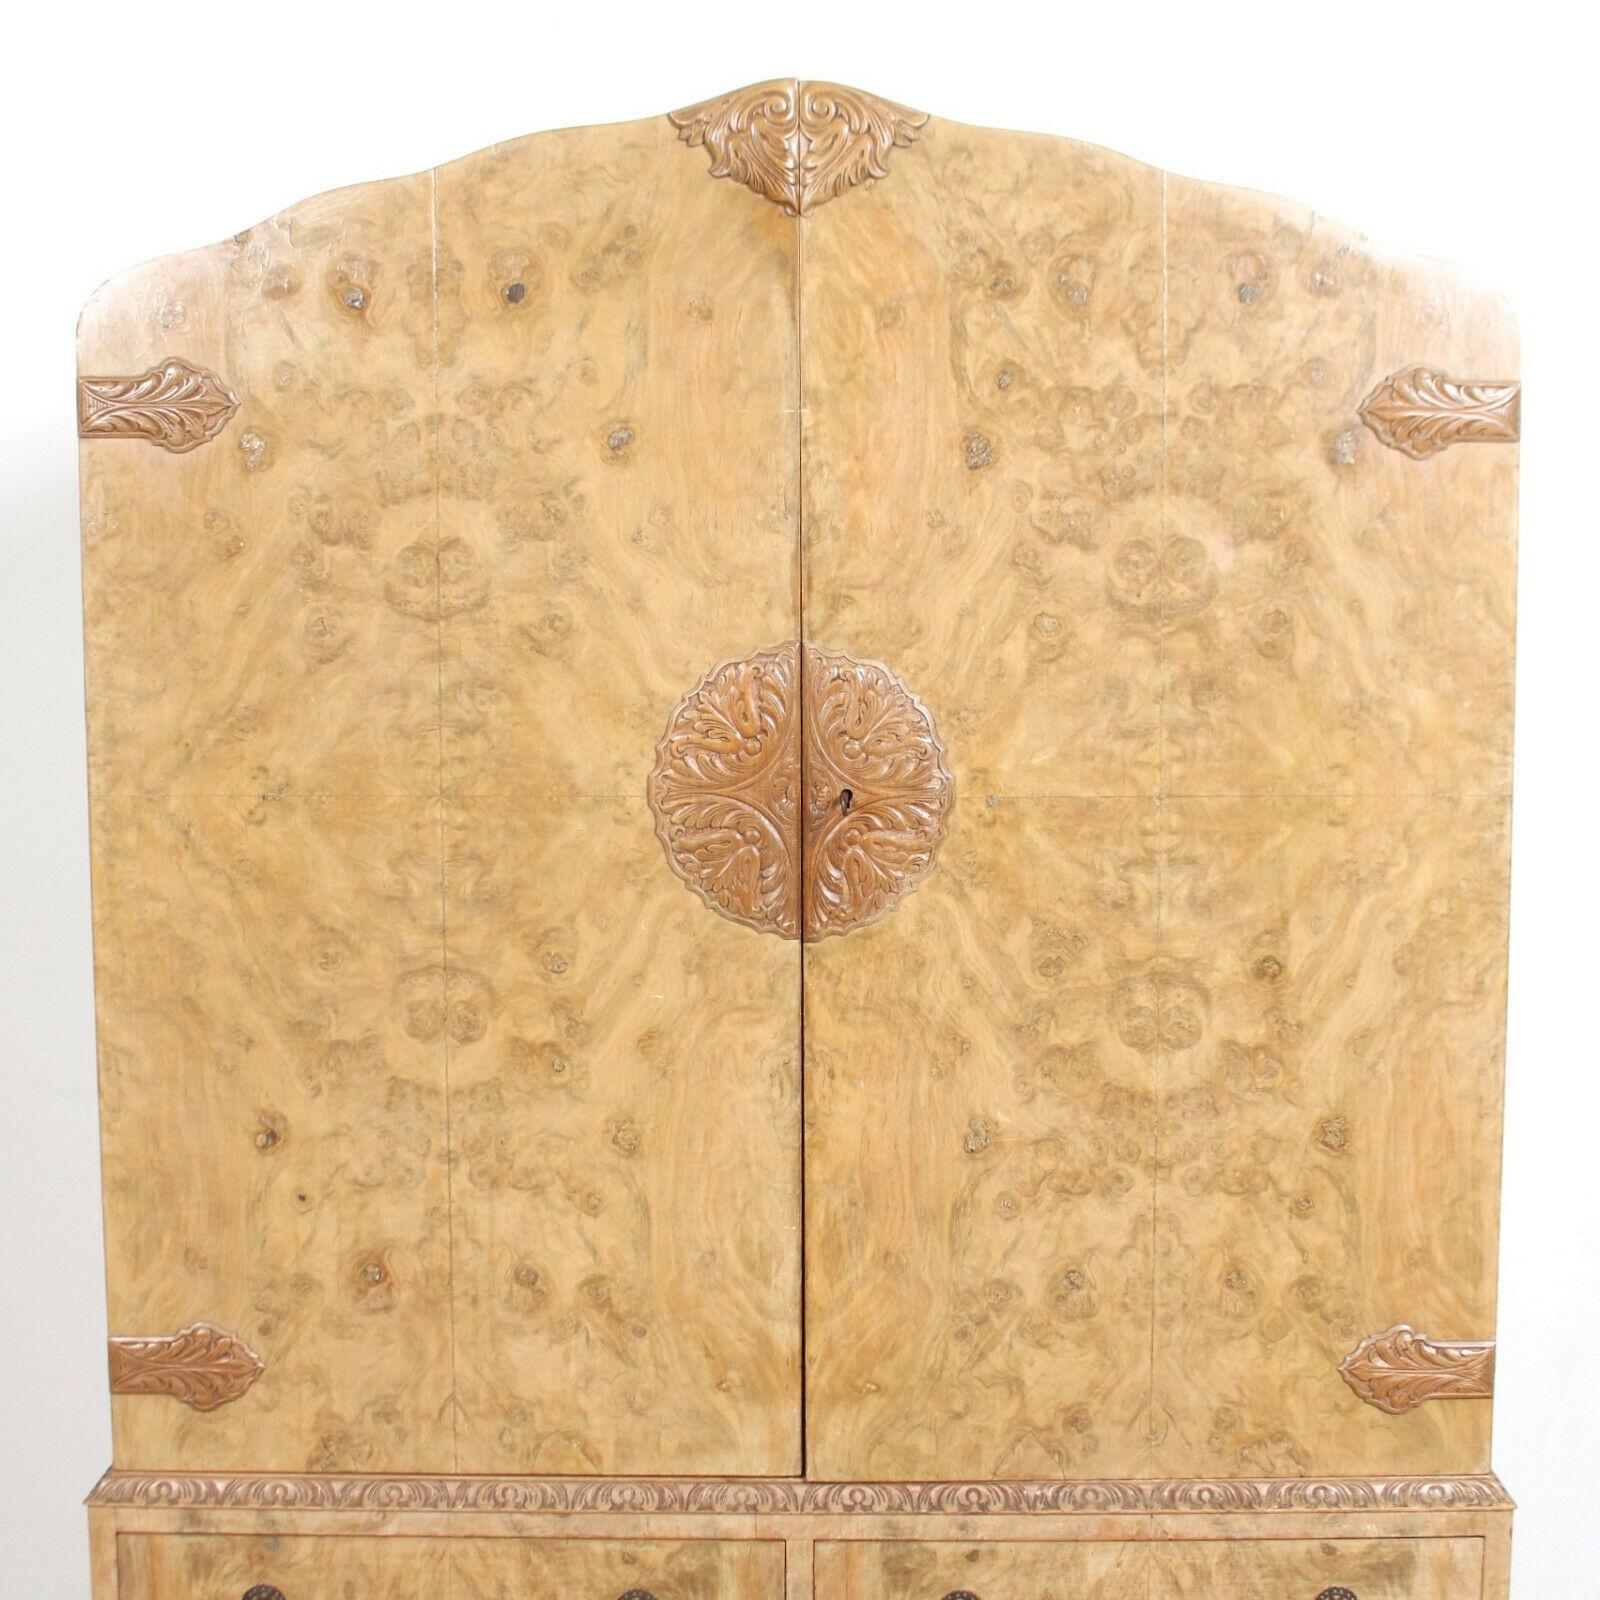 Bleached Burl Walnut Cocktail Cabinet Art Deco Drinks Bar In Good Condition For Sale In Newcastle upon Tyne, GB